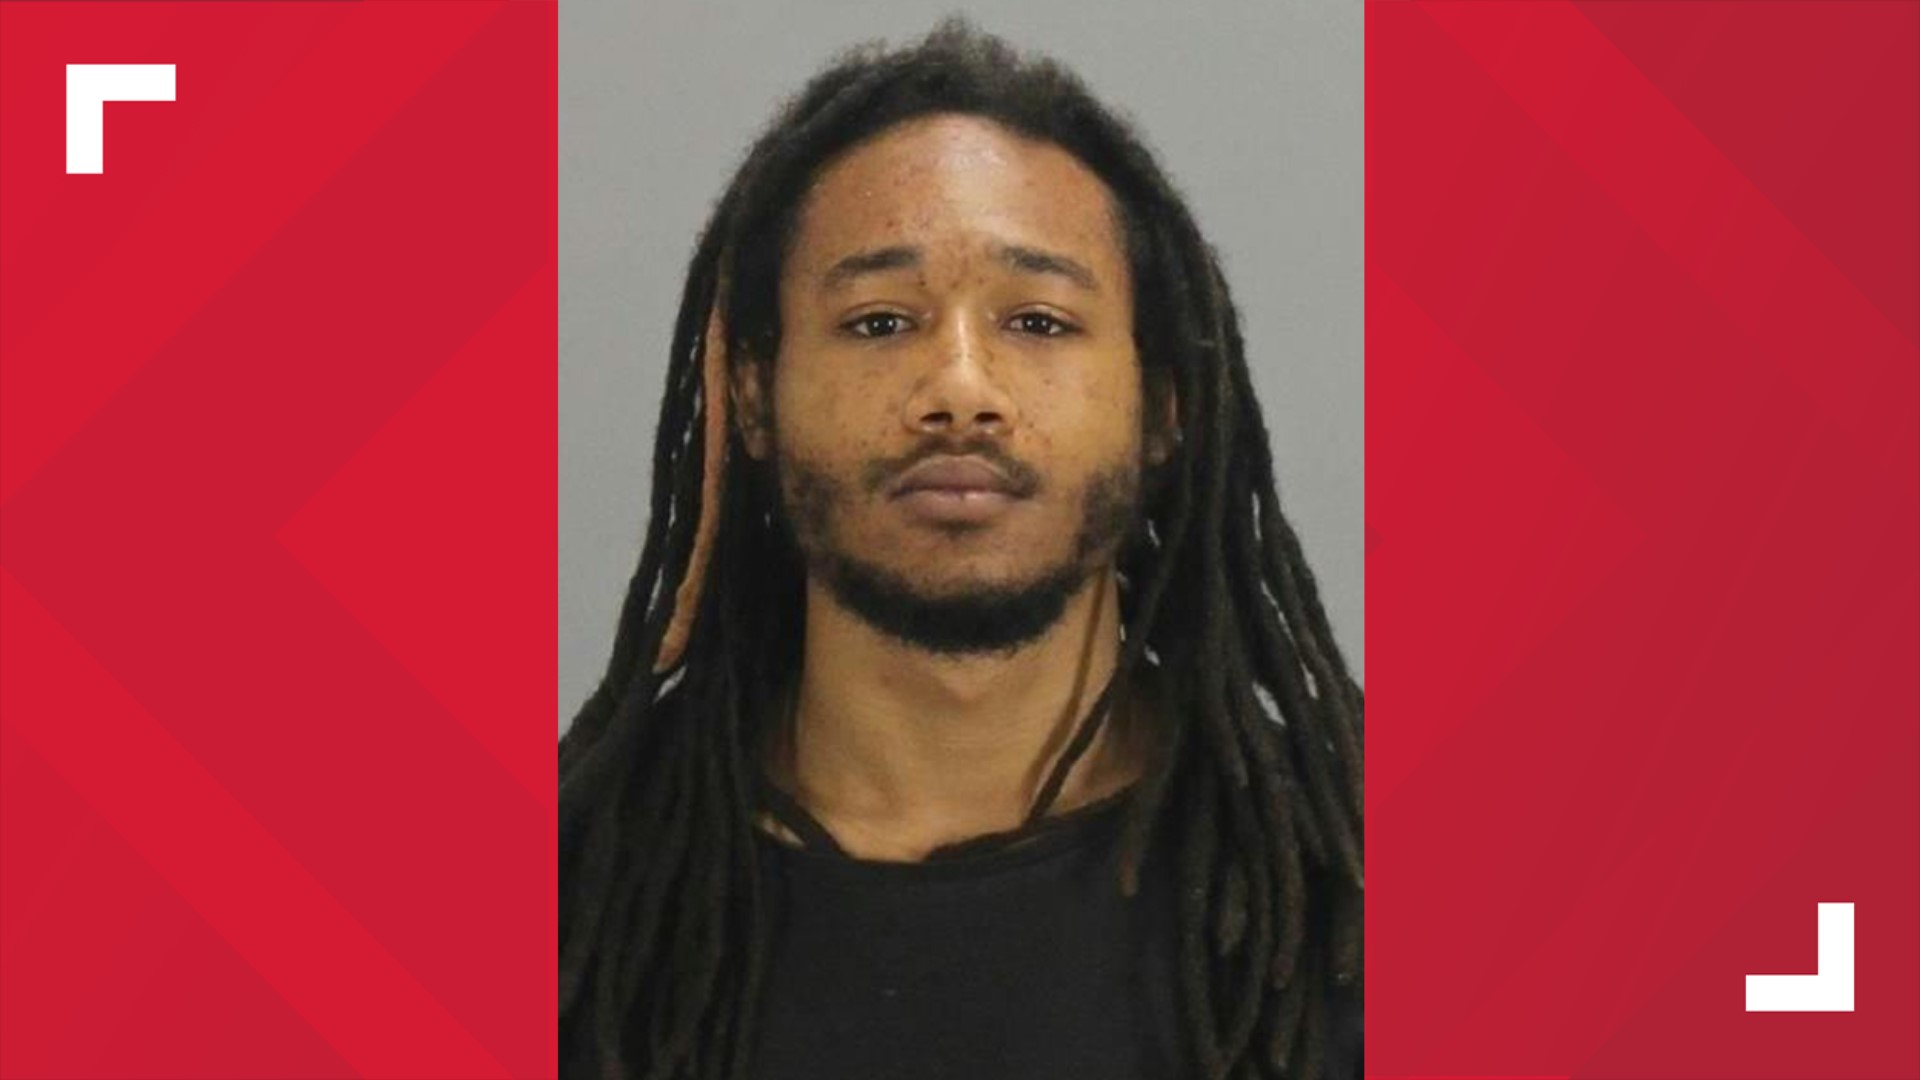 A man was arrested for choking a 19-year-old to death on Sunday night, Clayton County Police Department said.